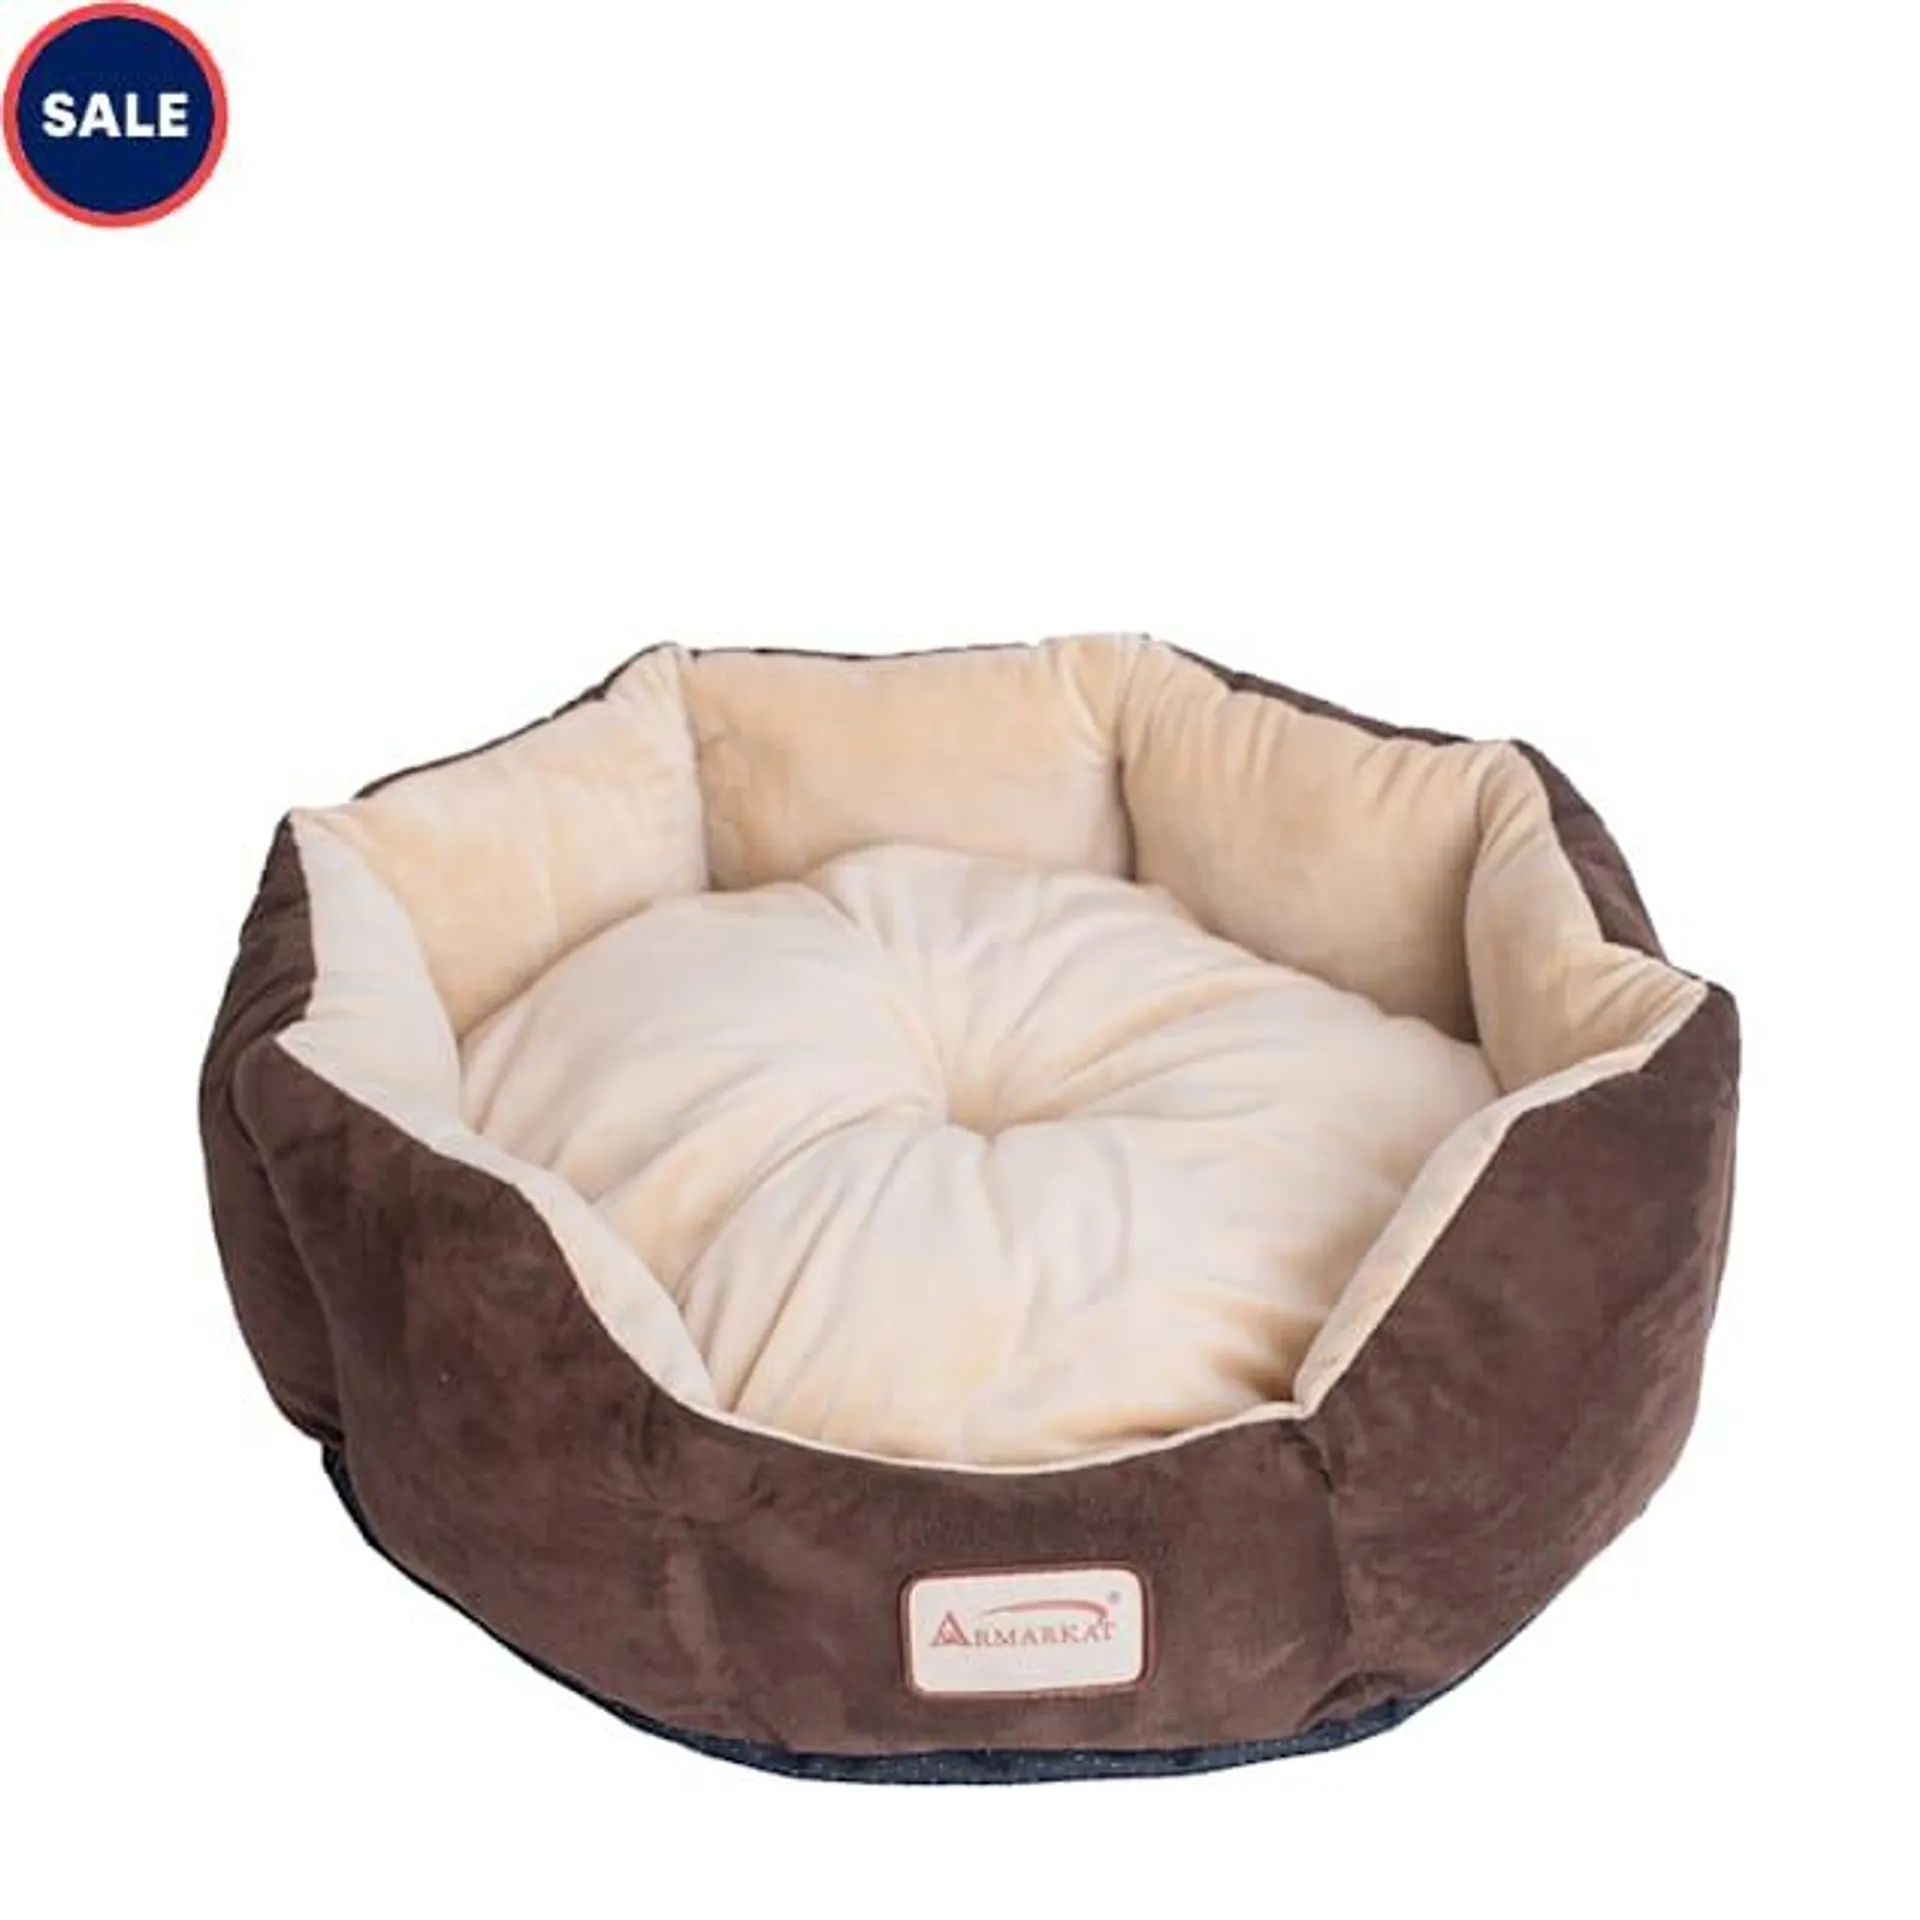 Armarkat Cozy Cat Bed in Mocha and Beige, 20" L X 20" W